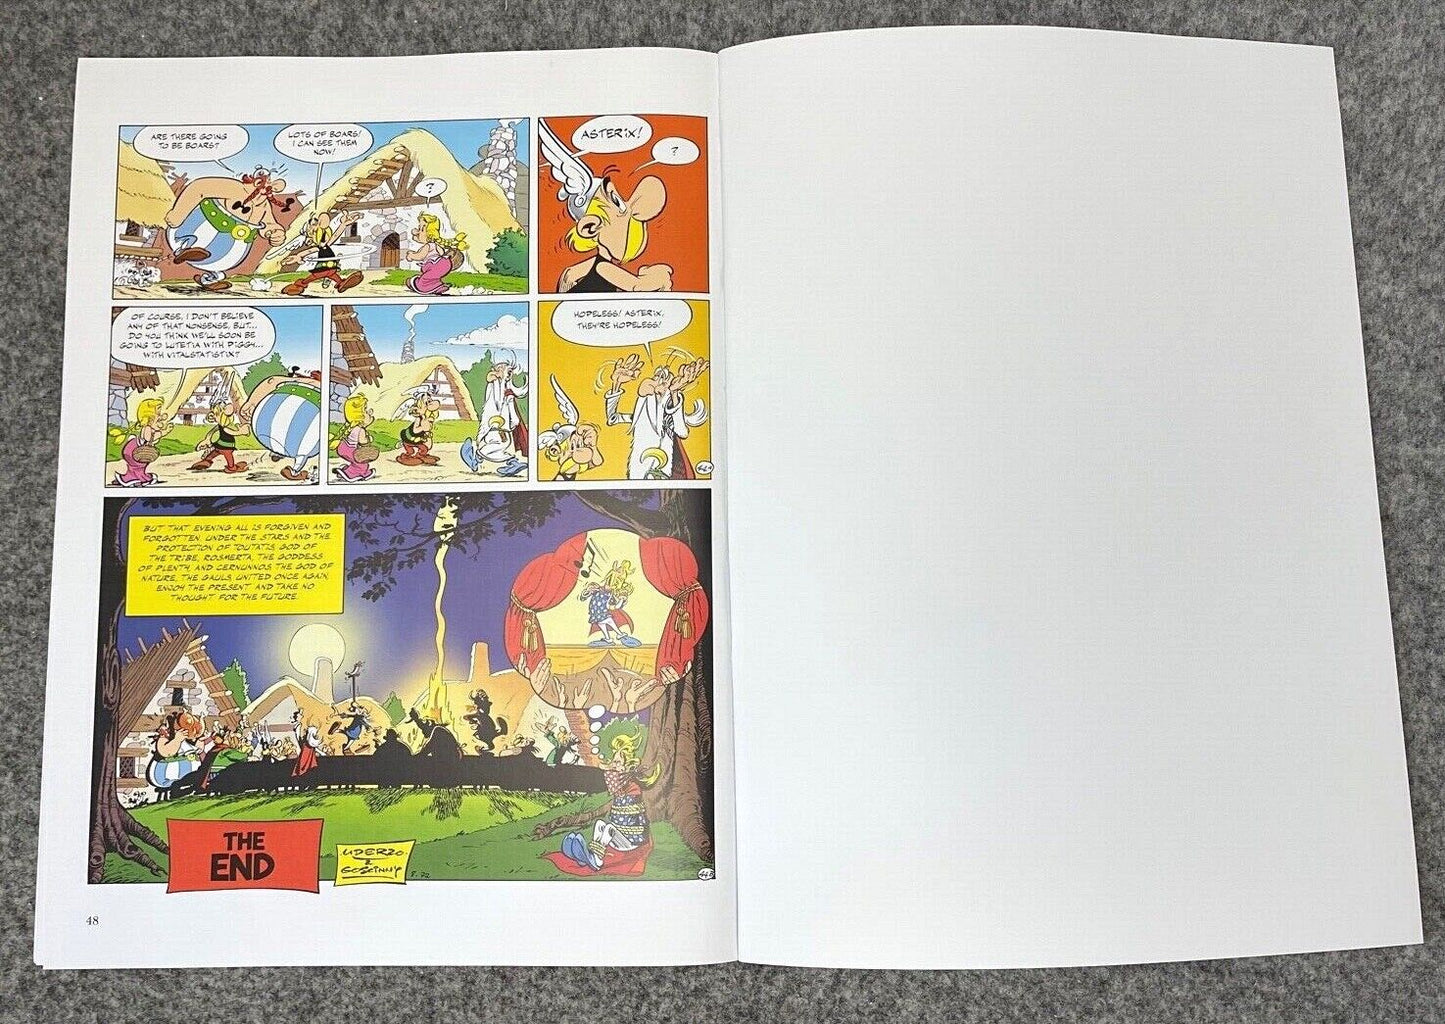 Asterix & Soothsayer - 2000s Orion/Sphere UK Edition Paperback Book EO Uderzo